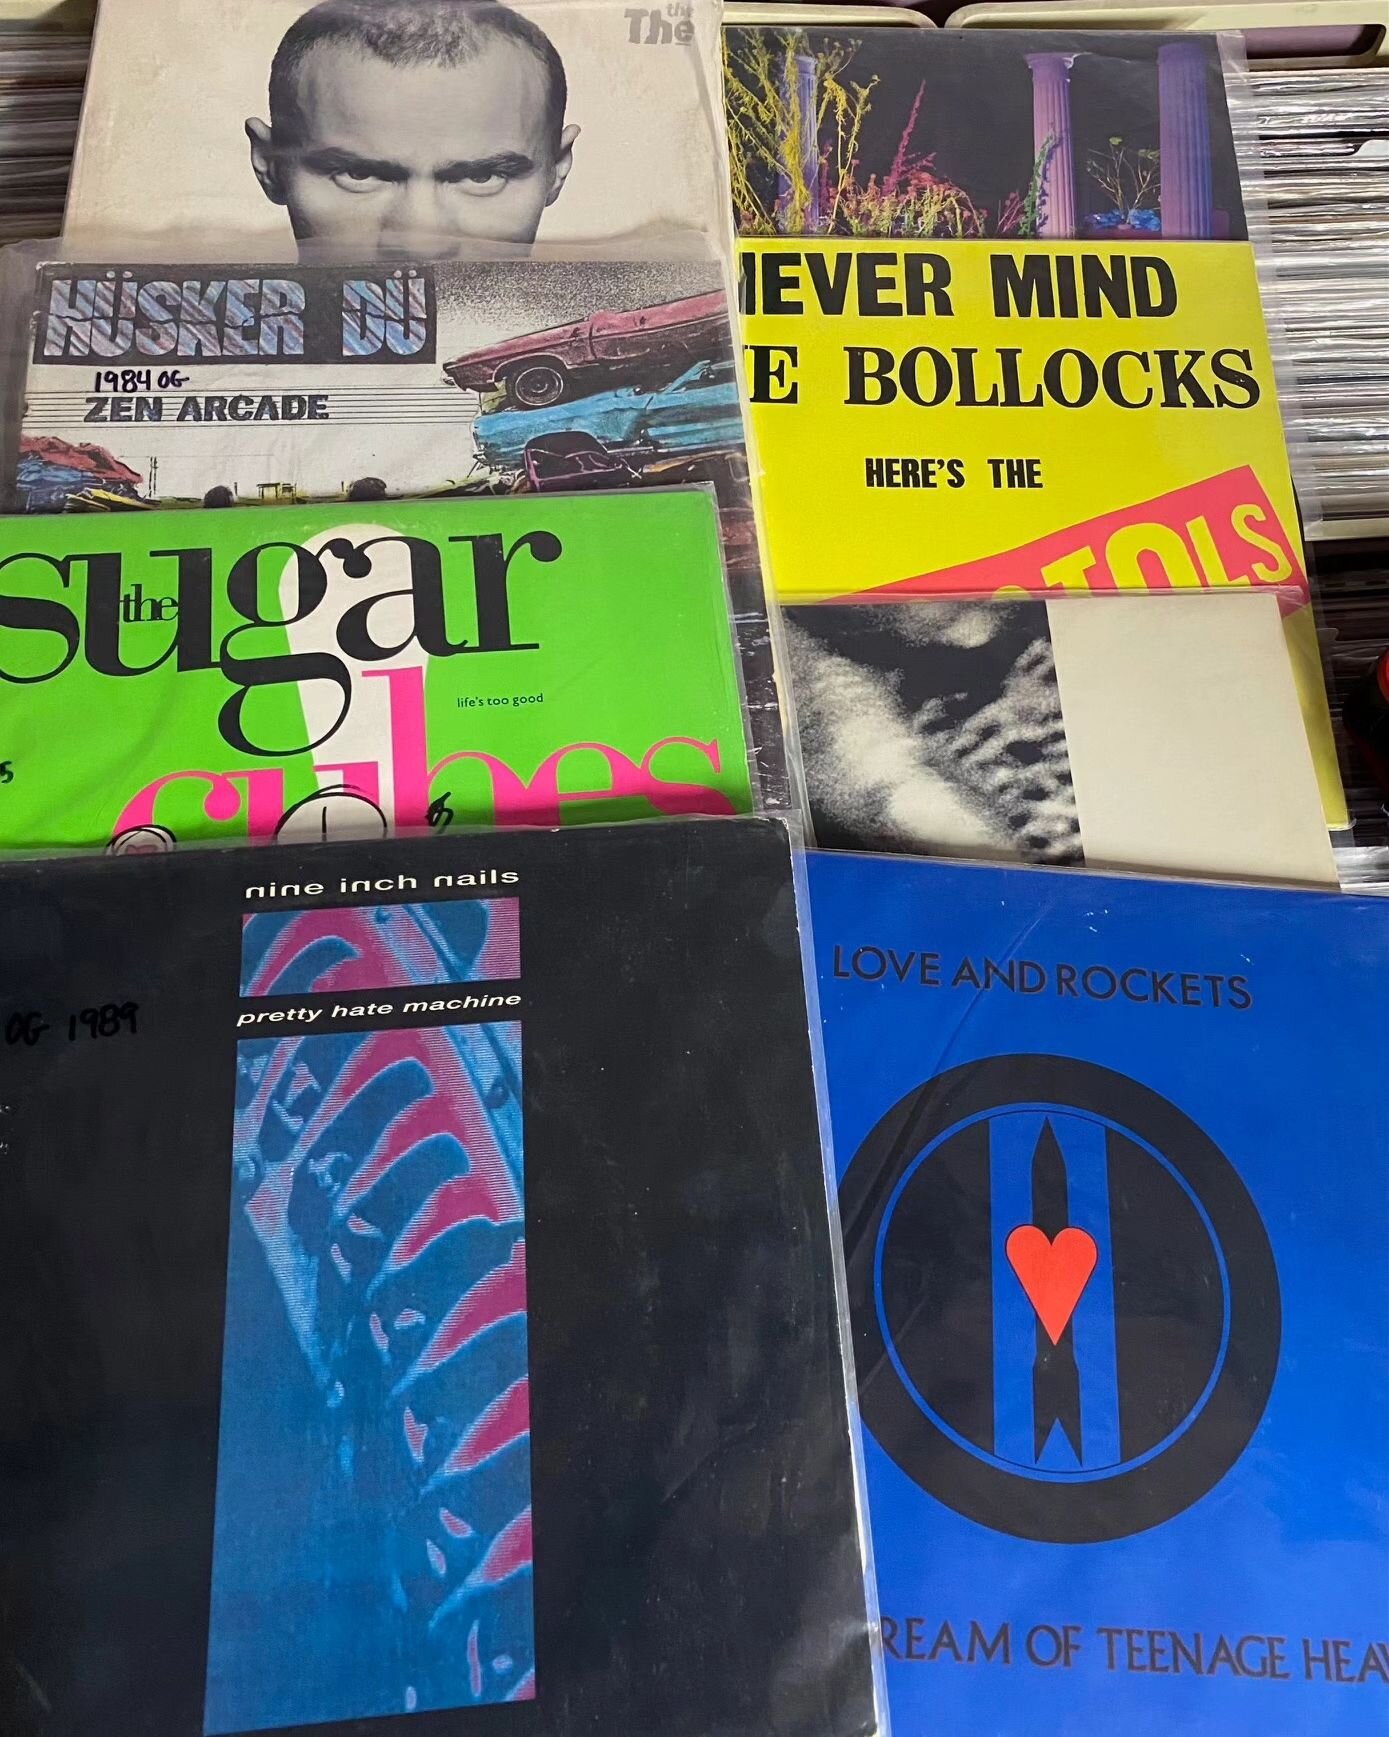 ☆ DEALER SPOTLIGHT ☆
HOLDFAST RECORDS

&bull; SEPTEMBER 30 2023 &bull;
Field House : Garden City Record Show

HoldFast&nbsp;Records will be bringing over 1,000 new arrivals, including punk, alternative, rock LPs and reggae 45&rsquo;s - all priced rea